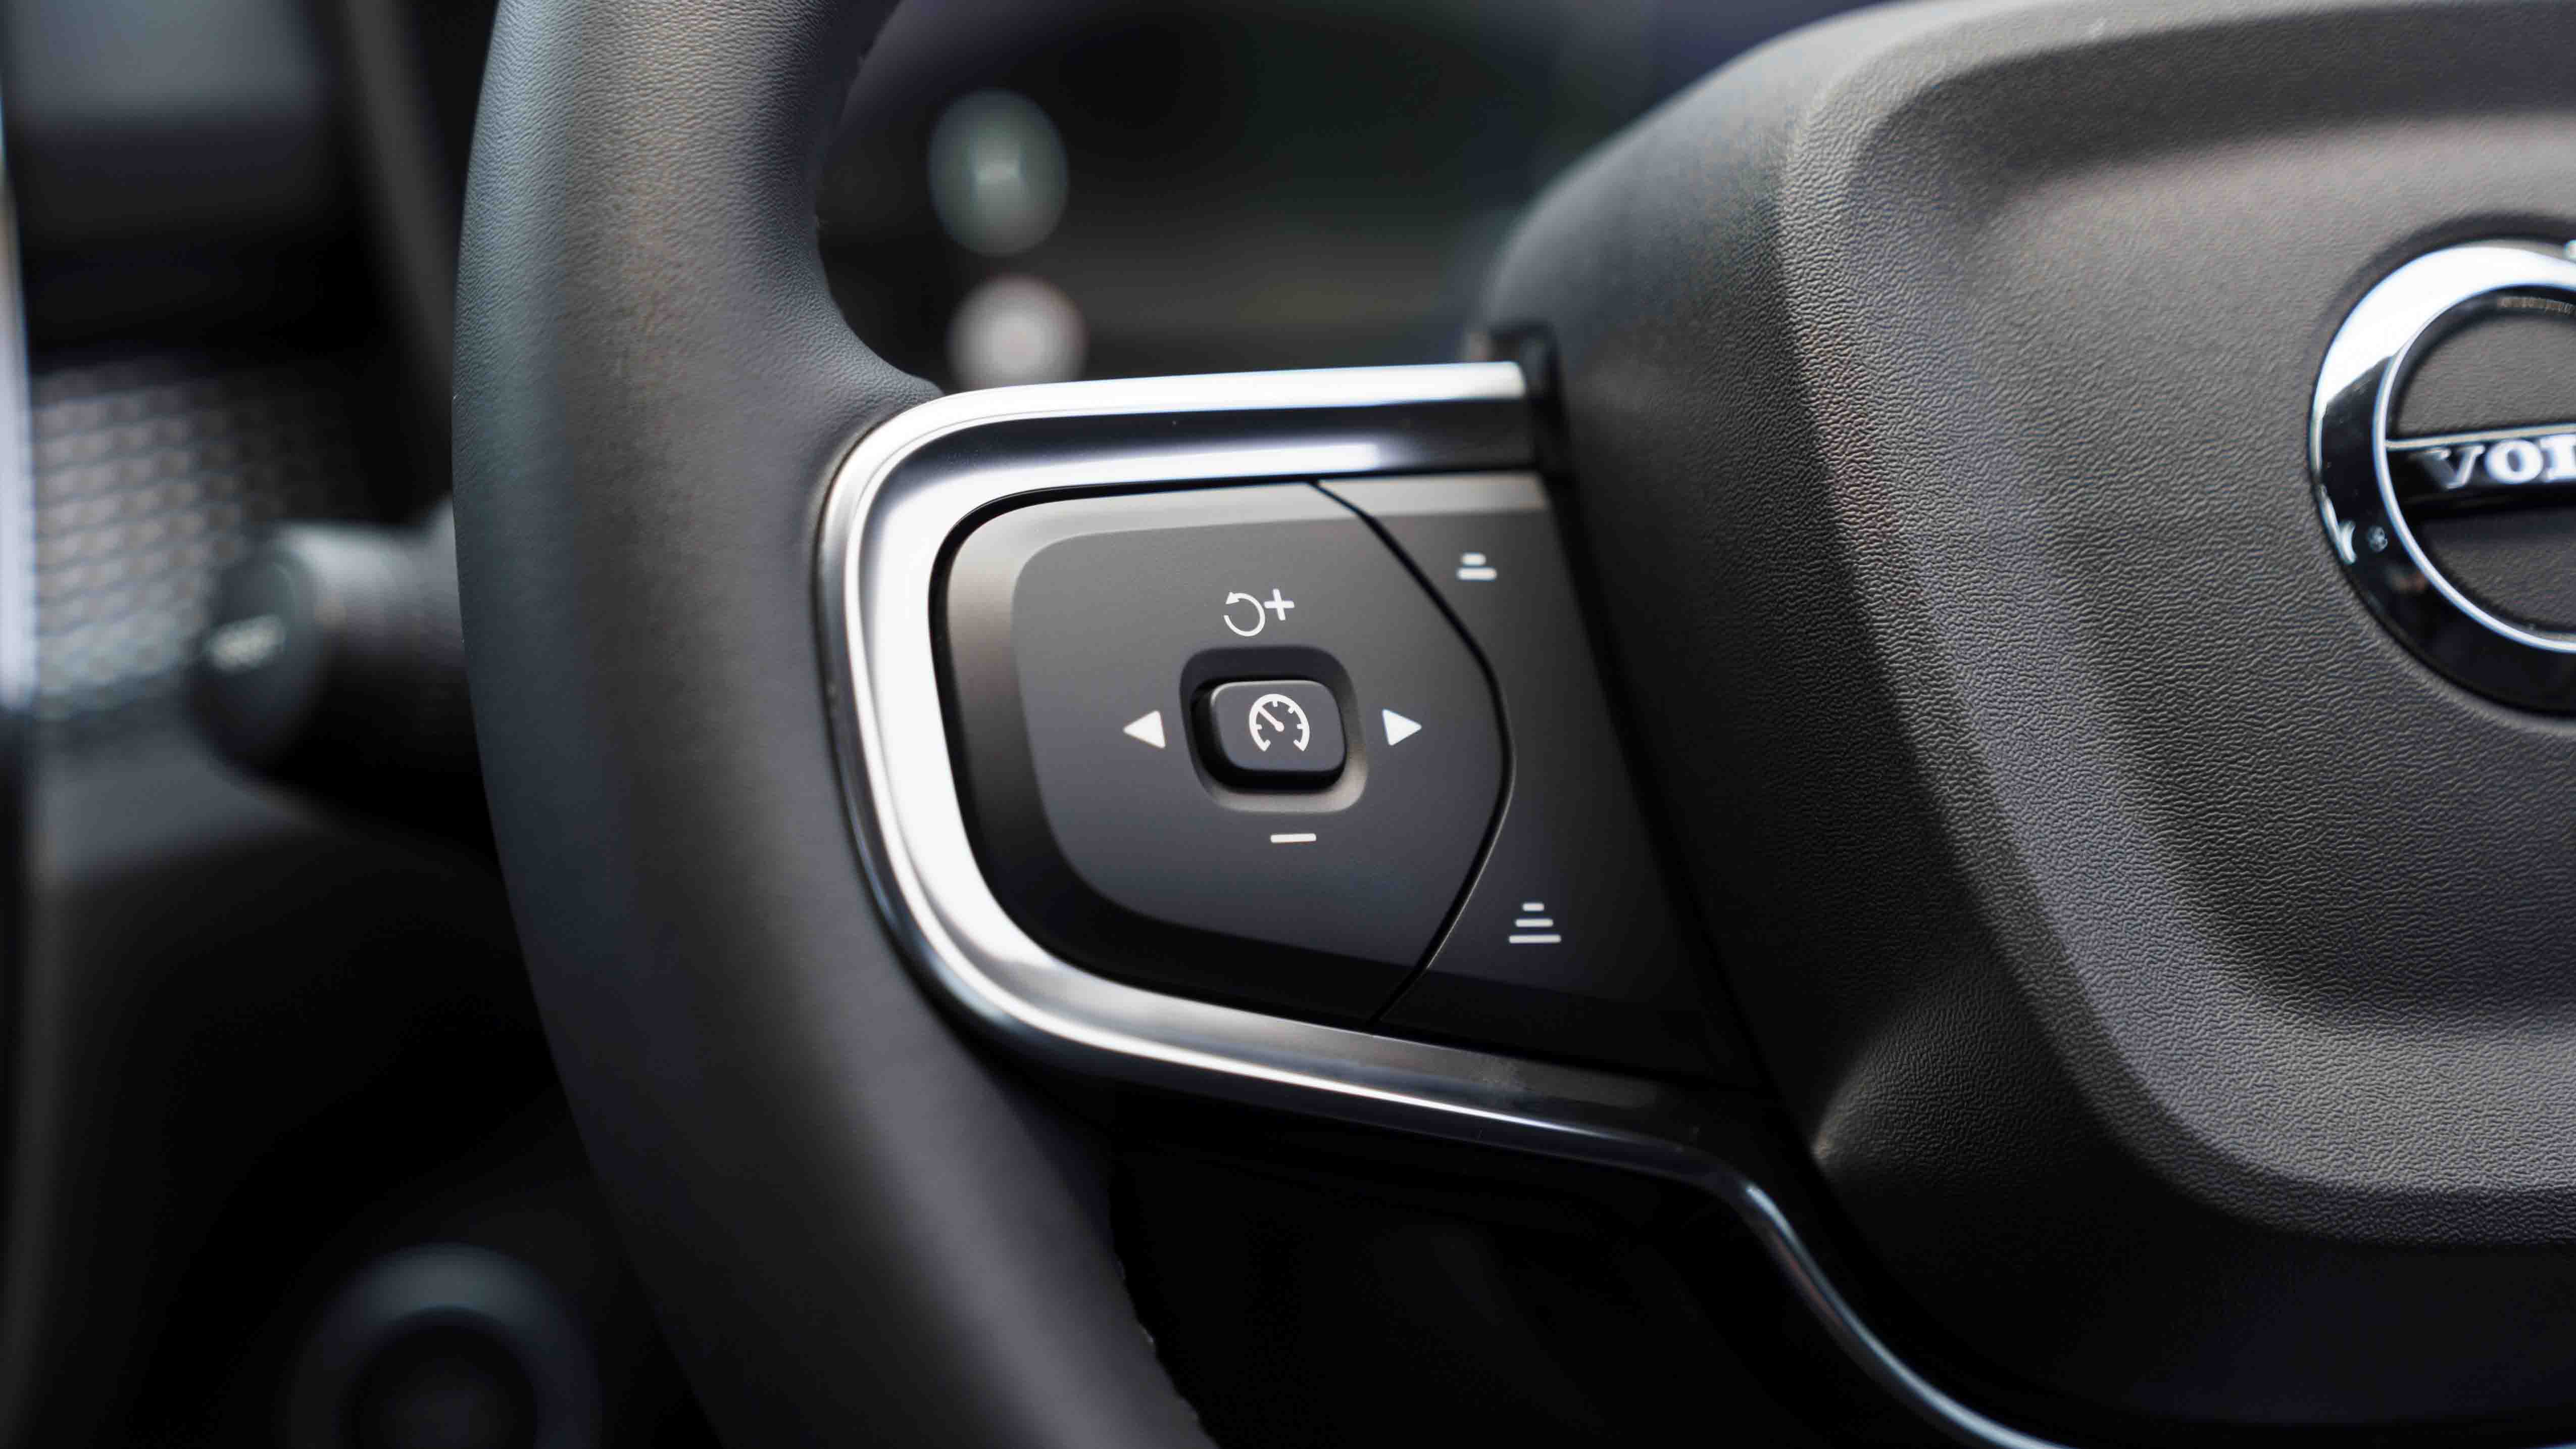 Volvo XC40 steering wheel cruise control buttons